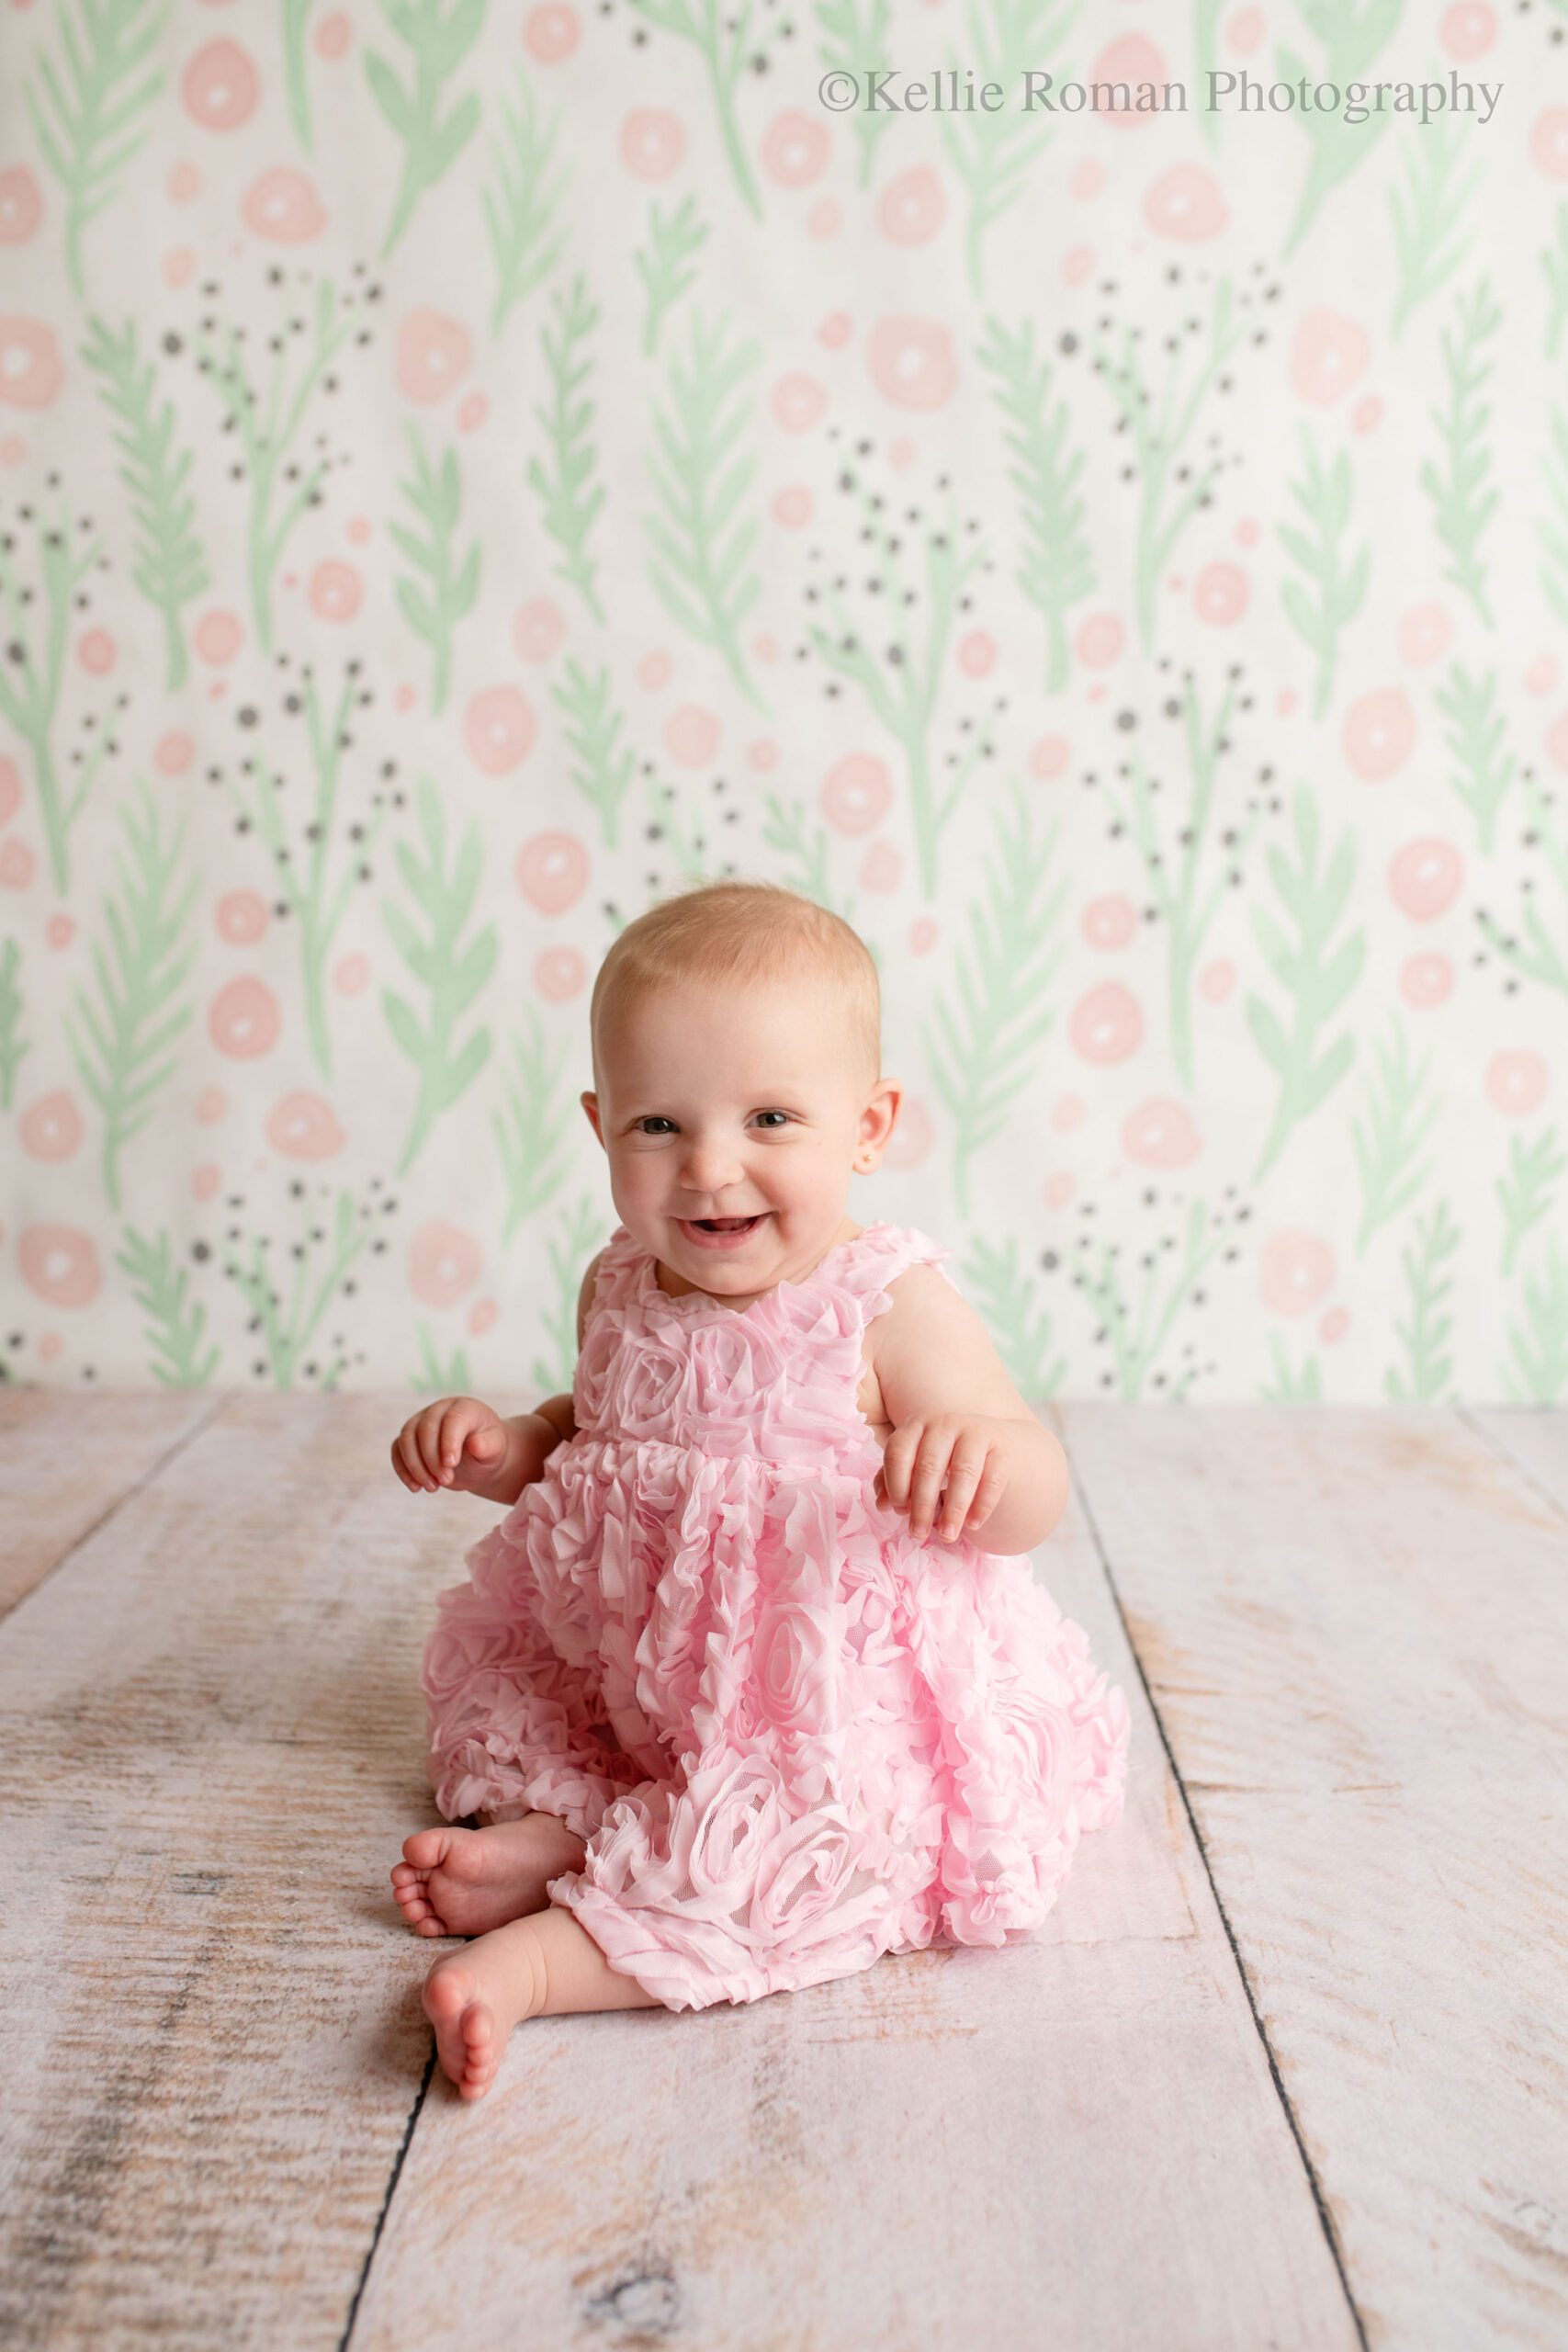 milwaukee baby photography. 6 month old baby sitting on her own wearing a bubble gum pink dress and smiling. the backdrop has green pink and grey floral pattern. baby is barefoot
